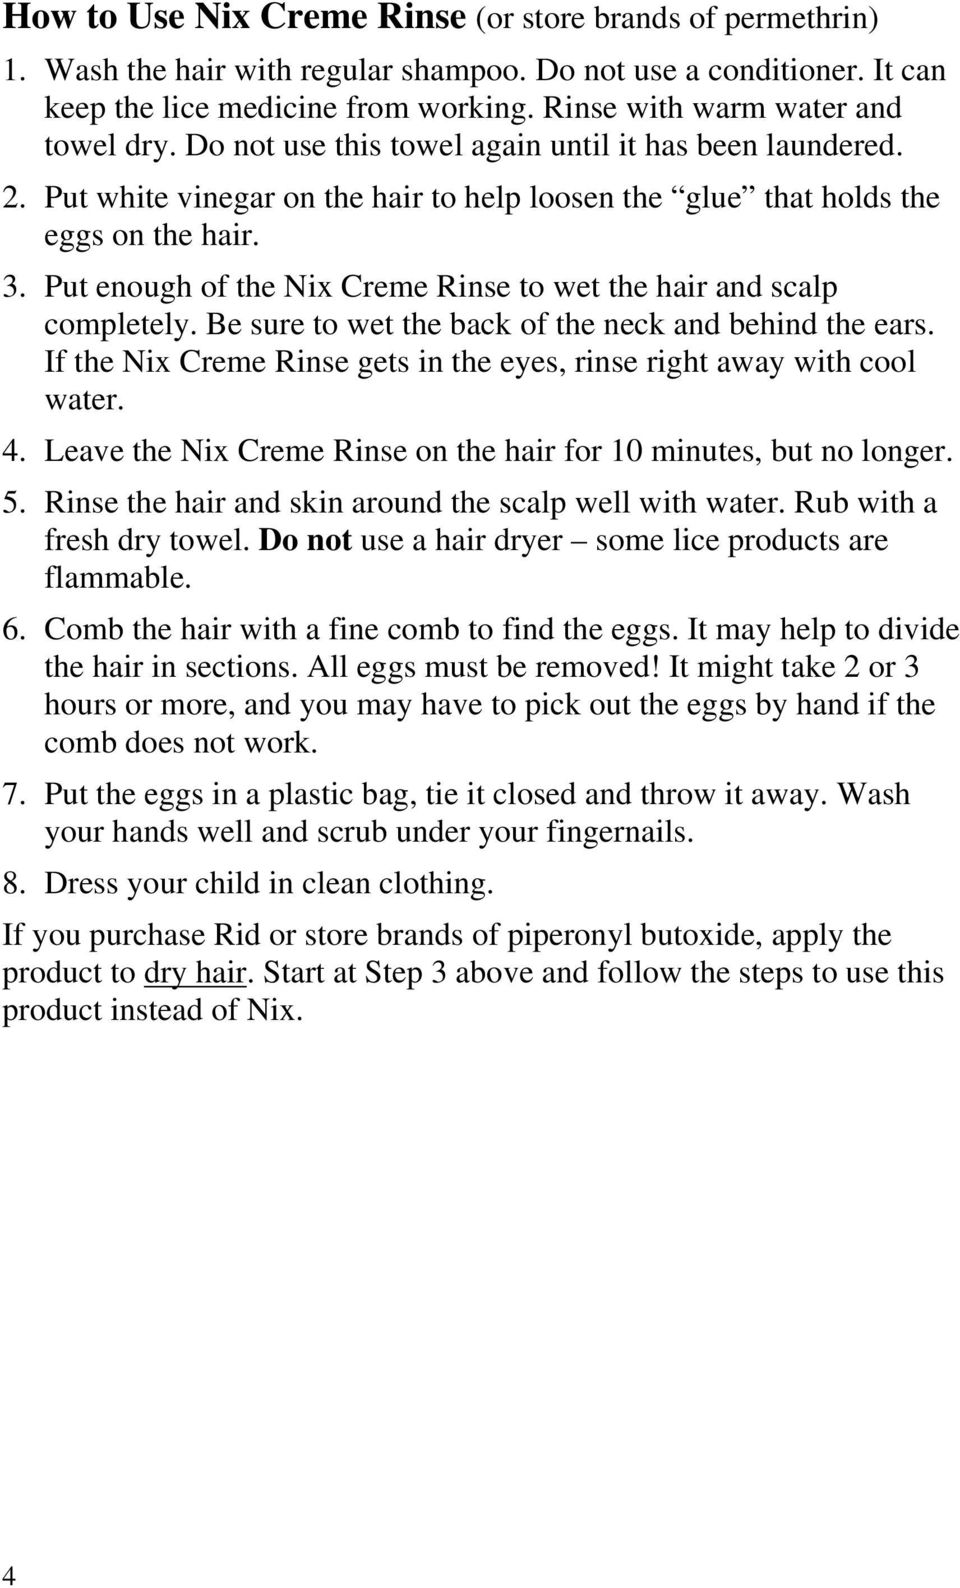 Put enough of the Nix Creme Rinse to wet the hair and scalp completely. Be sure to wet the back of the neck and behind the ears.